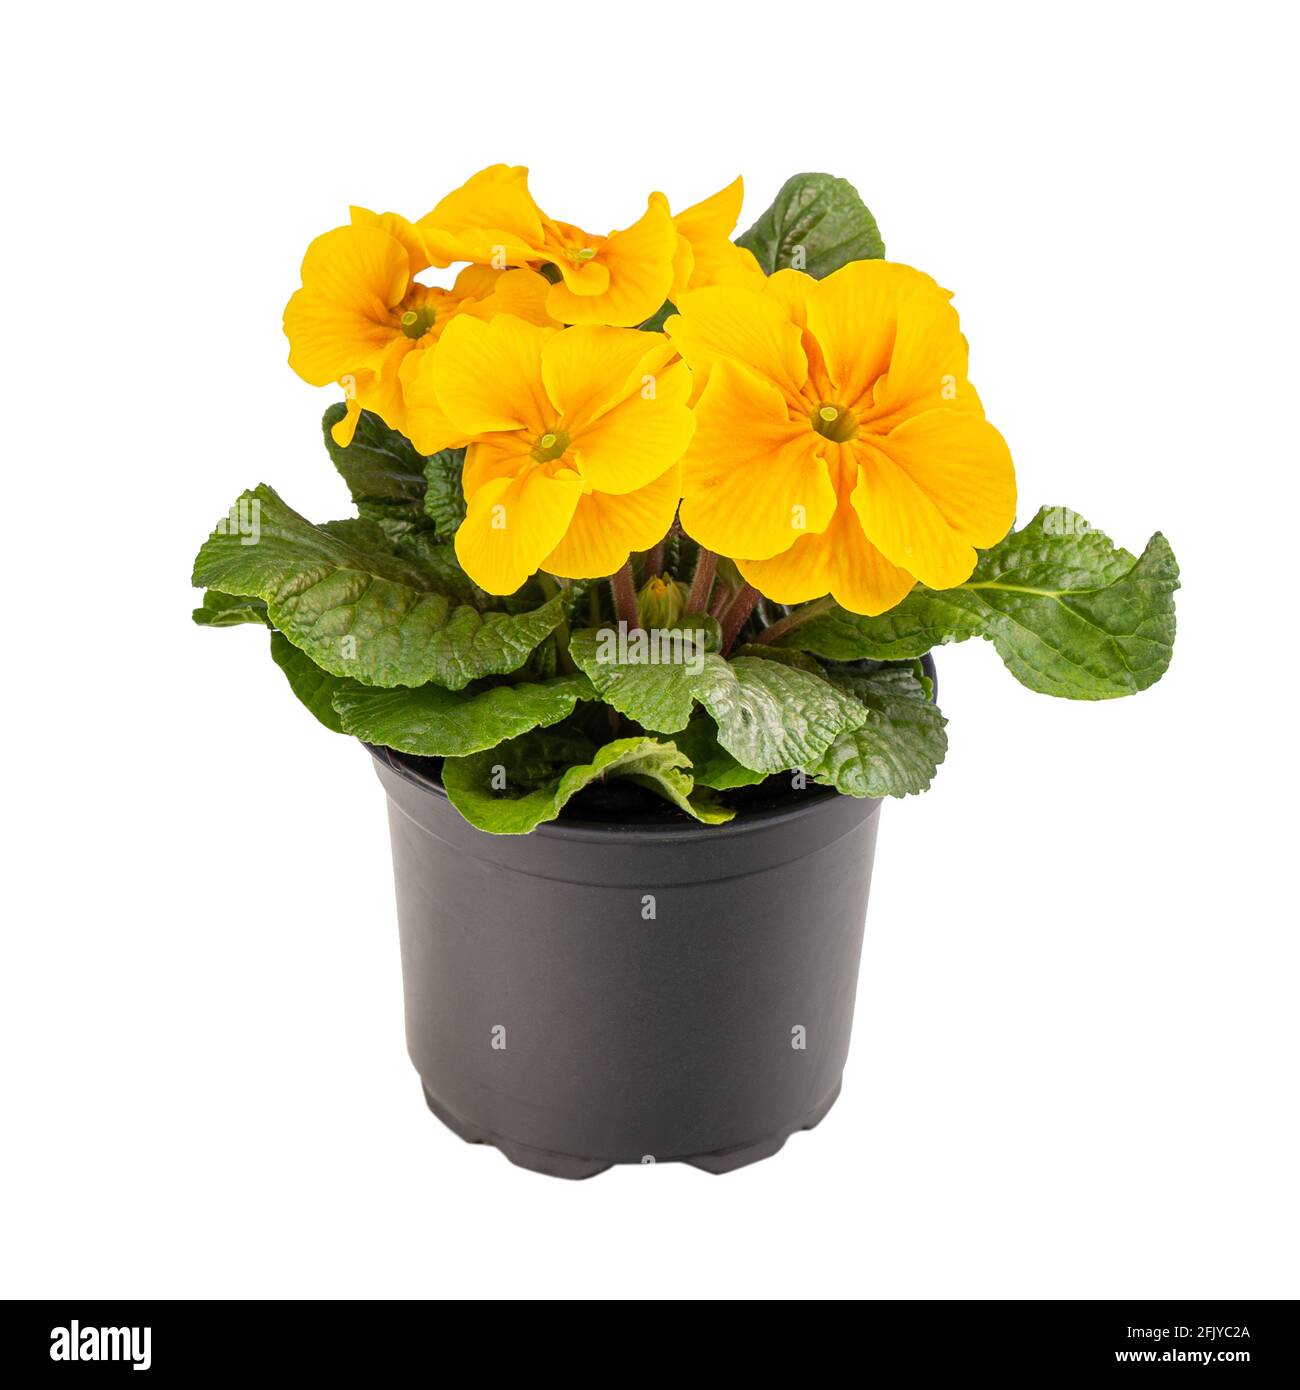 Yellow primrose or primula vulgaris in flower pot isolated on white background Stock Photo